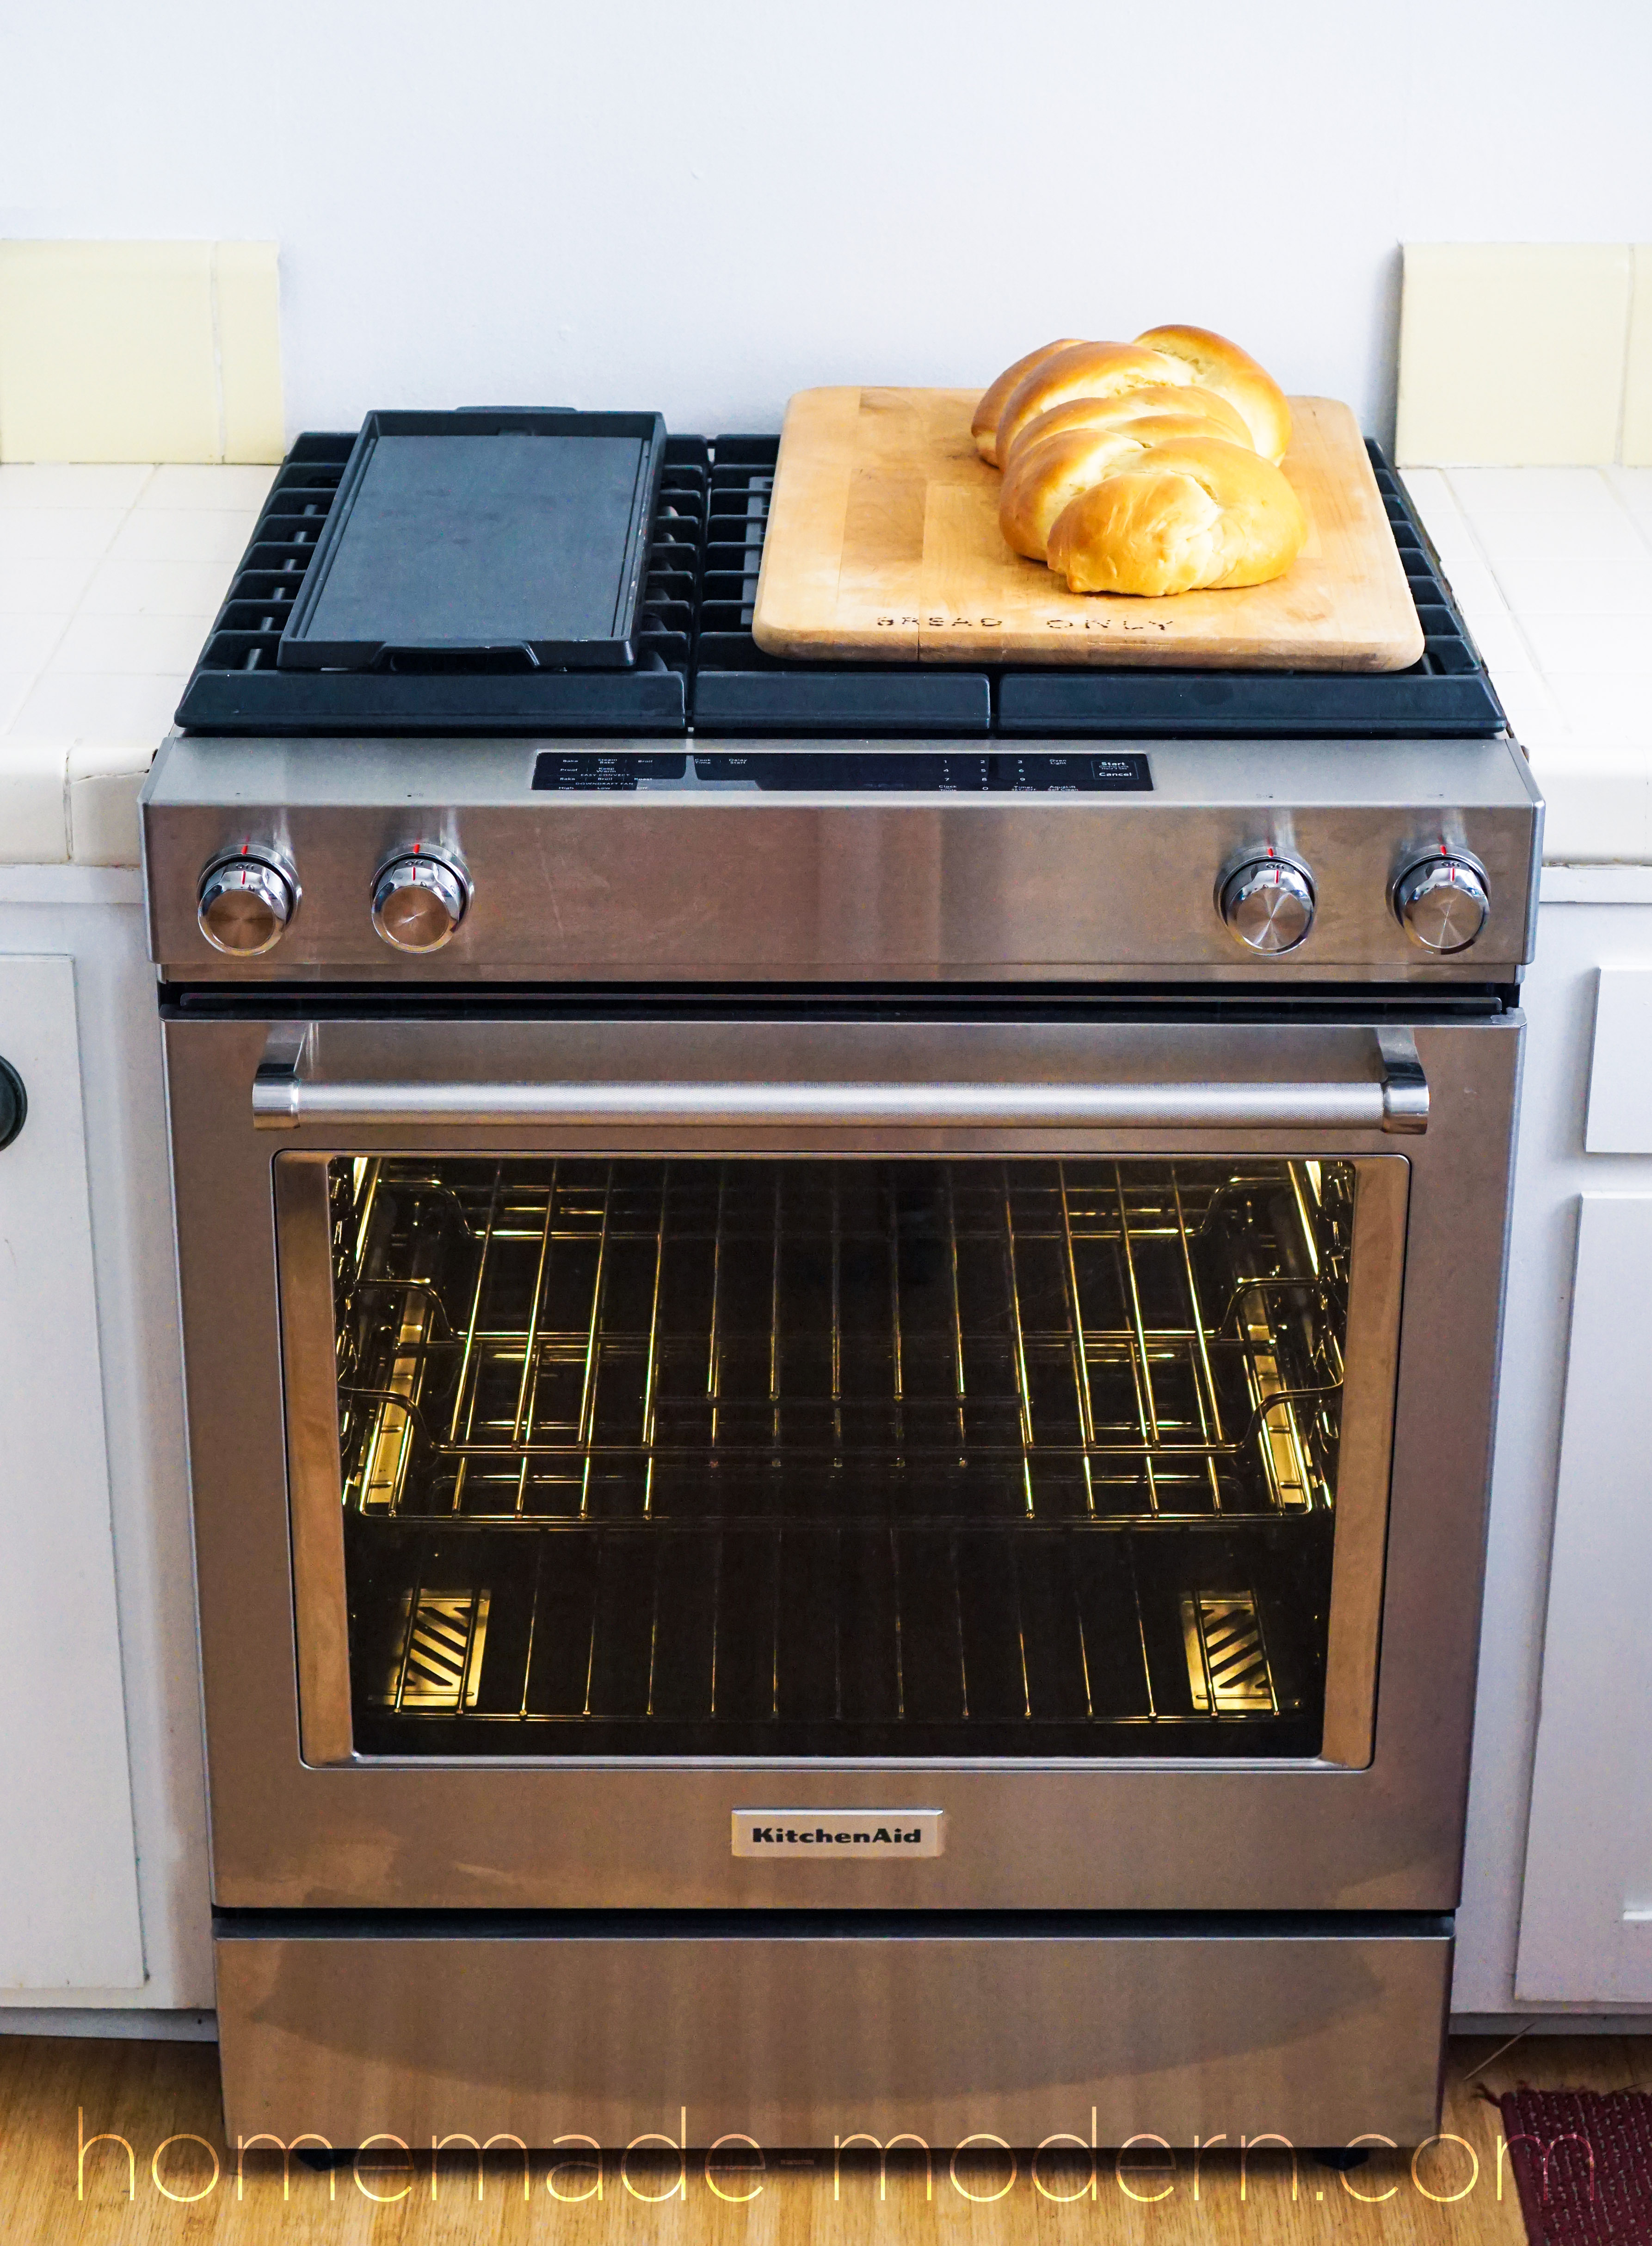 Ben upgrades his mother's oven and shares her bread recipe. Full instructions at HomeMade-Modern.com